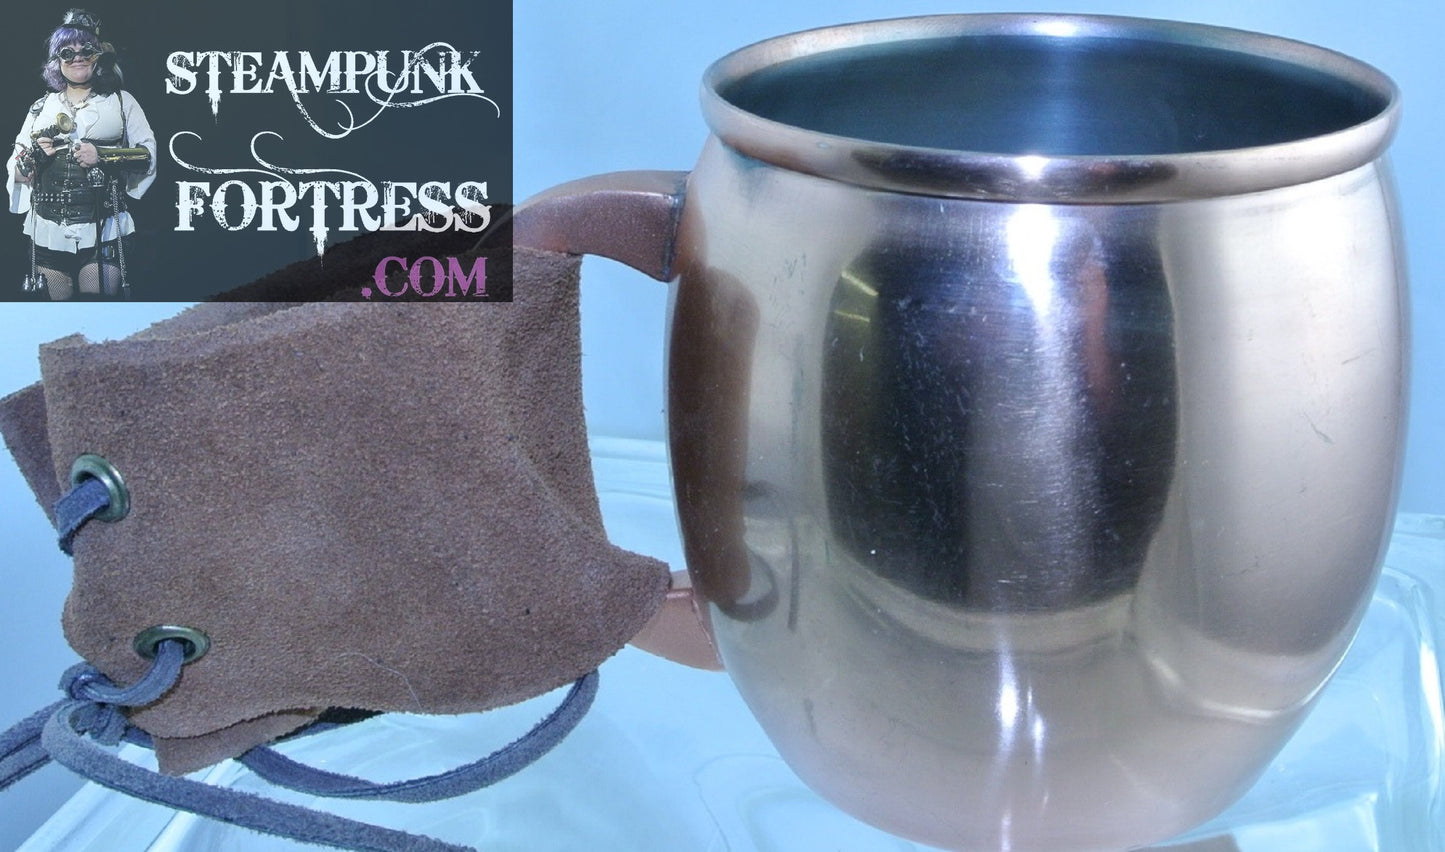 COPPER CUP MUG BROWN SUEDE LEATHER STRAP BRASS EYELETS TEA DUELING DUELLING COSPLAY COSTUME RENAISSANCE MEDIEVAL SCA STARR WILDE STEAMPUNK FORTRESS